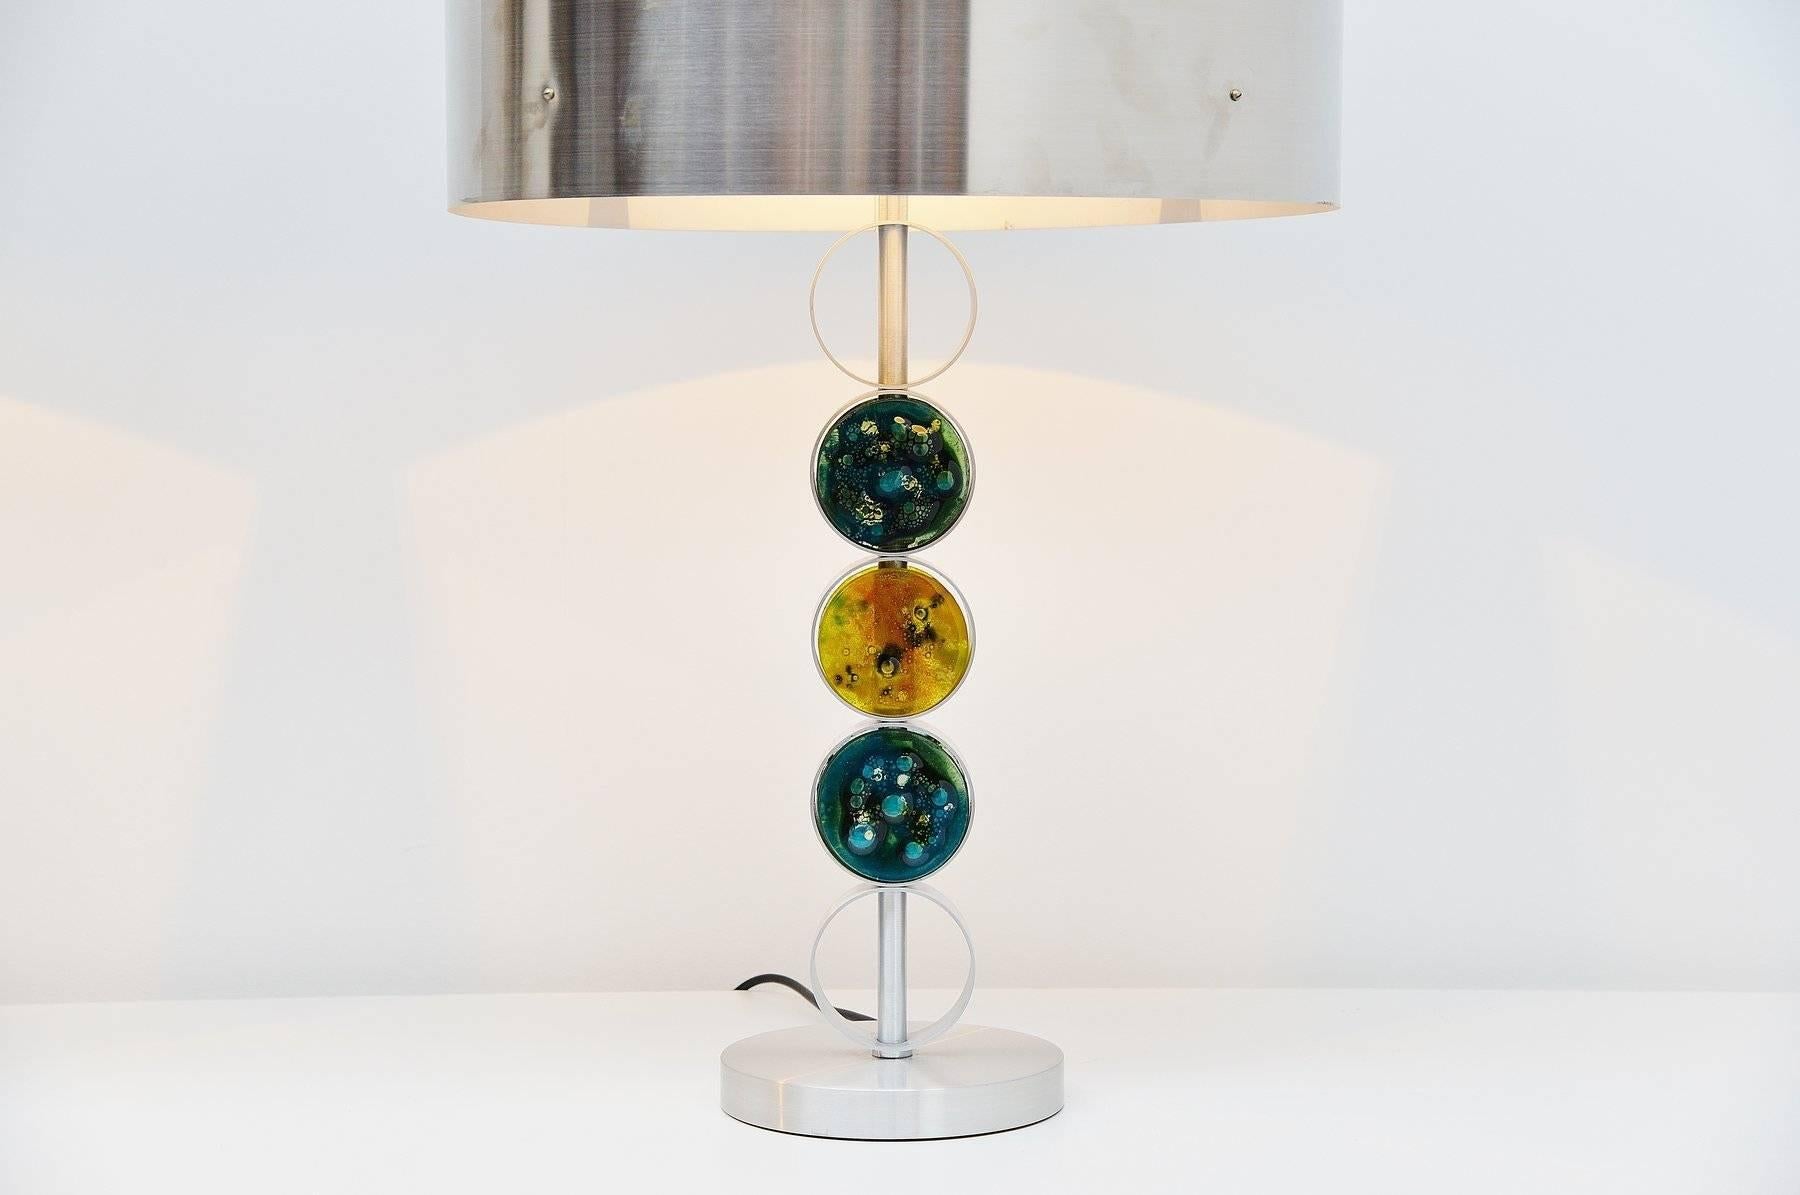 Very nice and oversized table lamps designed and made by Raak Amsterdam, Holland, 1972. This amazing pair of lamps is made of brushed steel and aluminum and the bases have glass details planet shaped. The lamps are in very good original condition